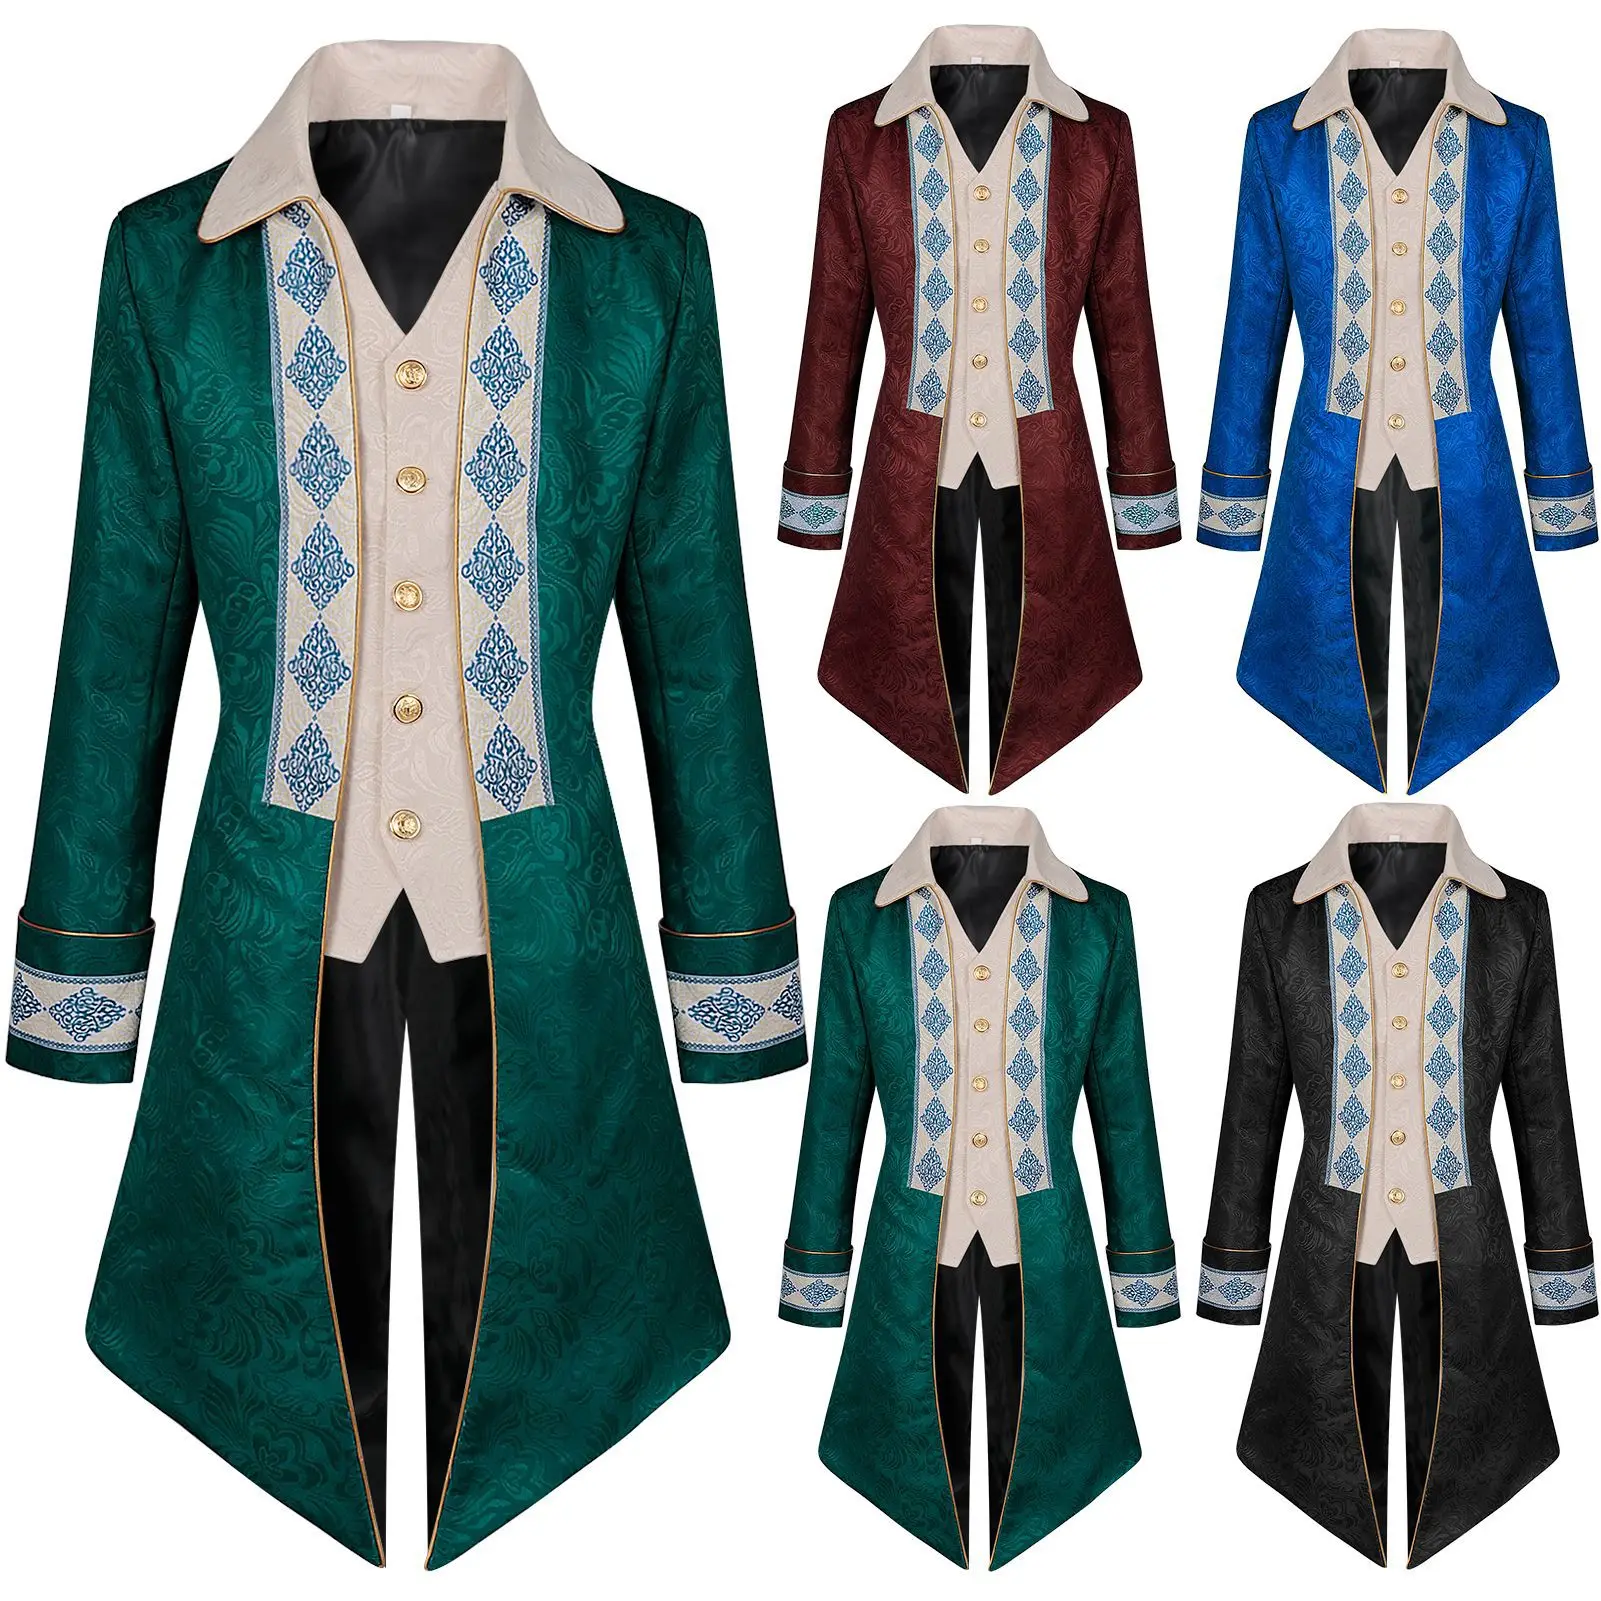 

Men's Medieval Embroidery Jacket Steampunk Gothic Tailcoat Vintage Victorian Tuxedo Carnival Uniform Party Trench Coat